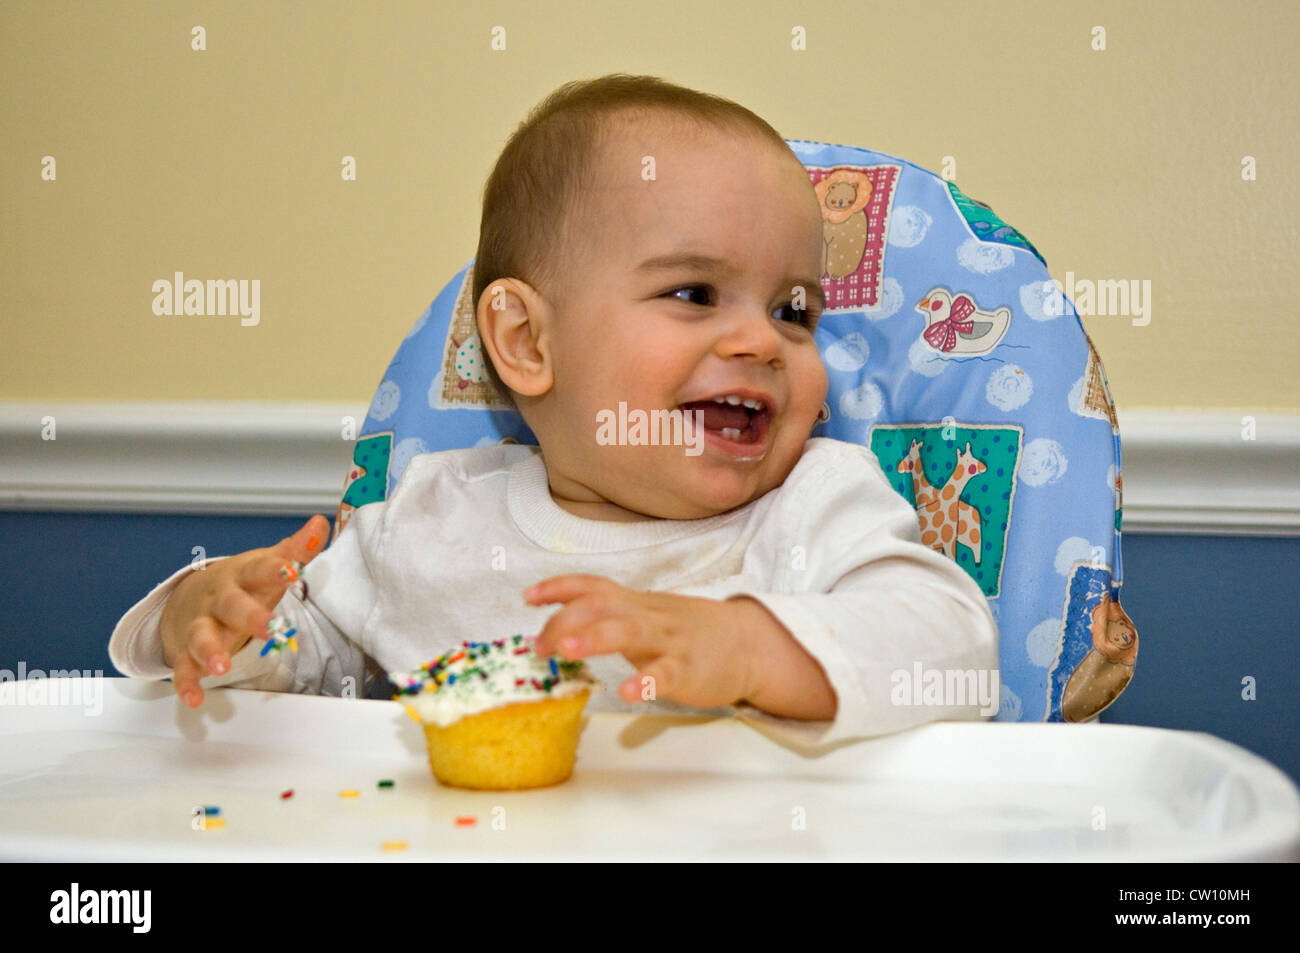 One Year Old Baby Boy Eating Cupcake for the First Time on His Birthday Stock Photo